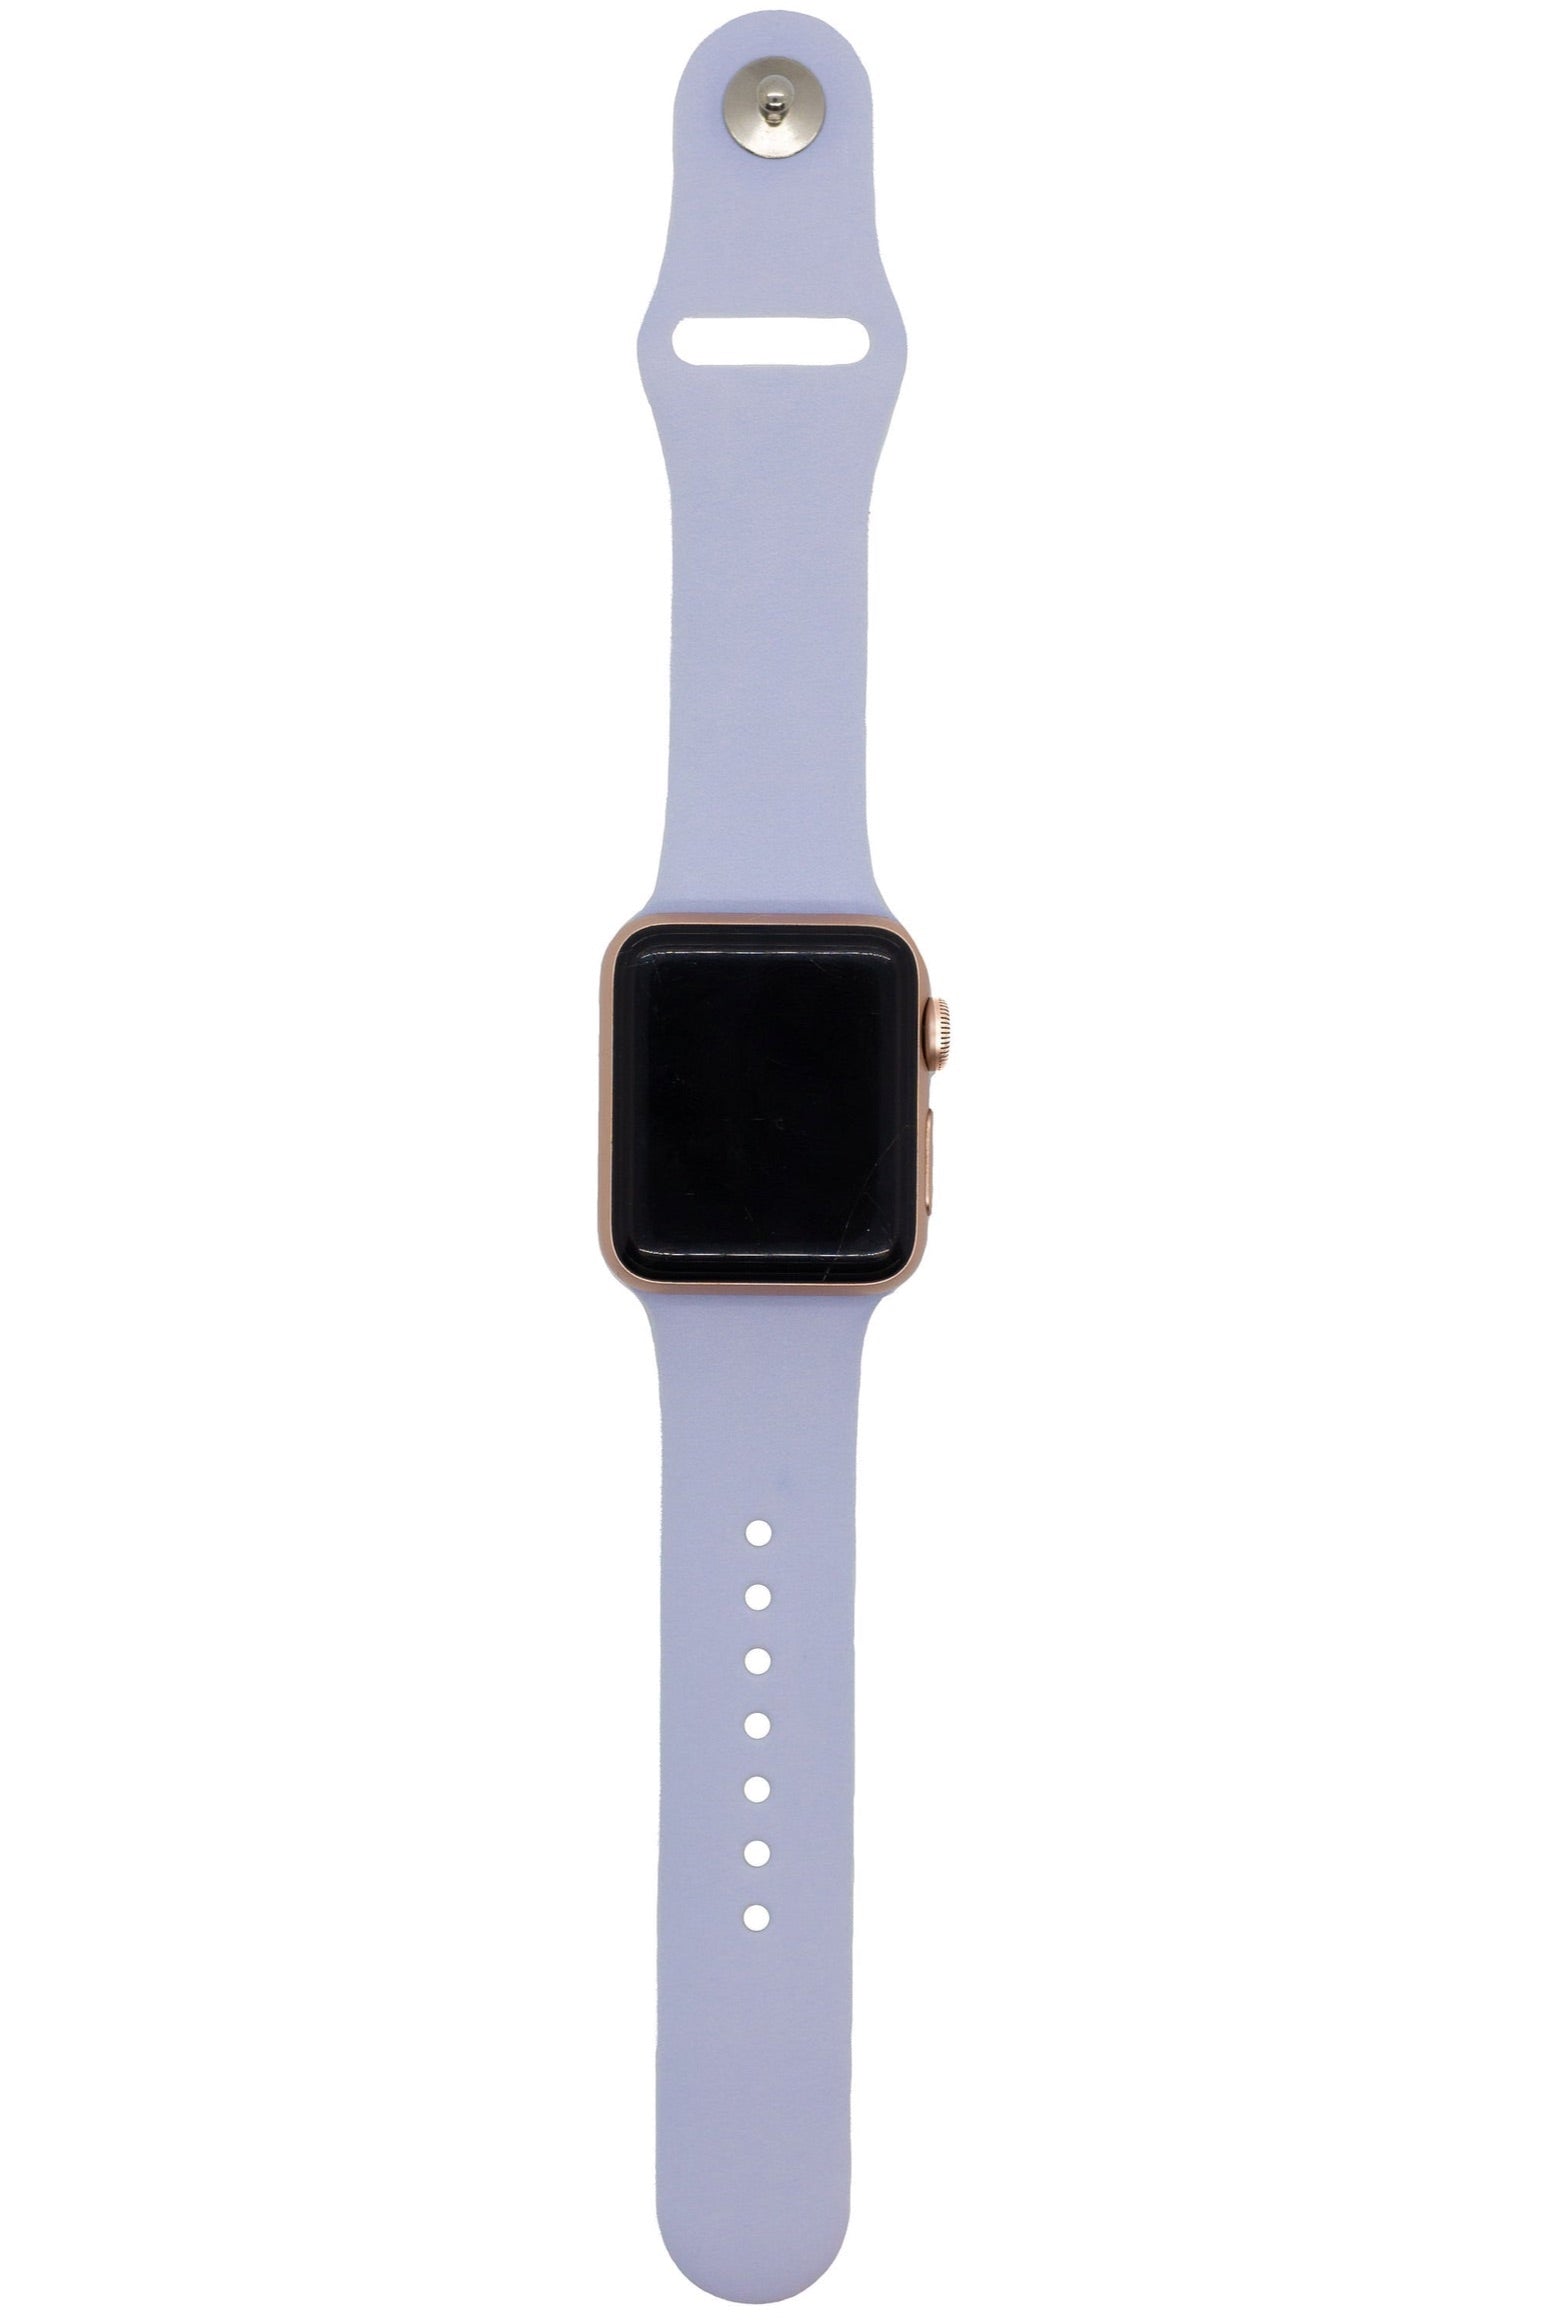 Periwink by Fullmhouse - Apple Watch Band